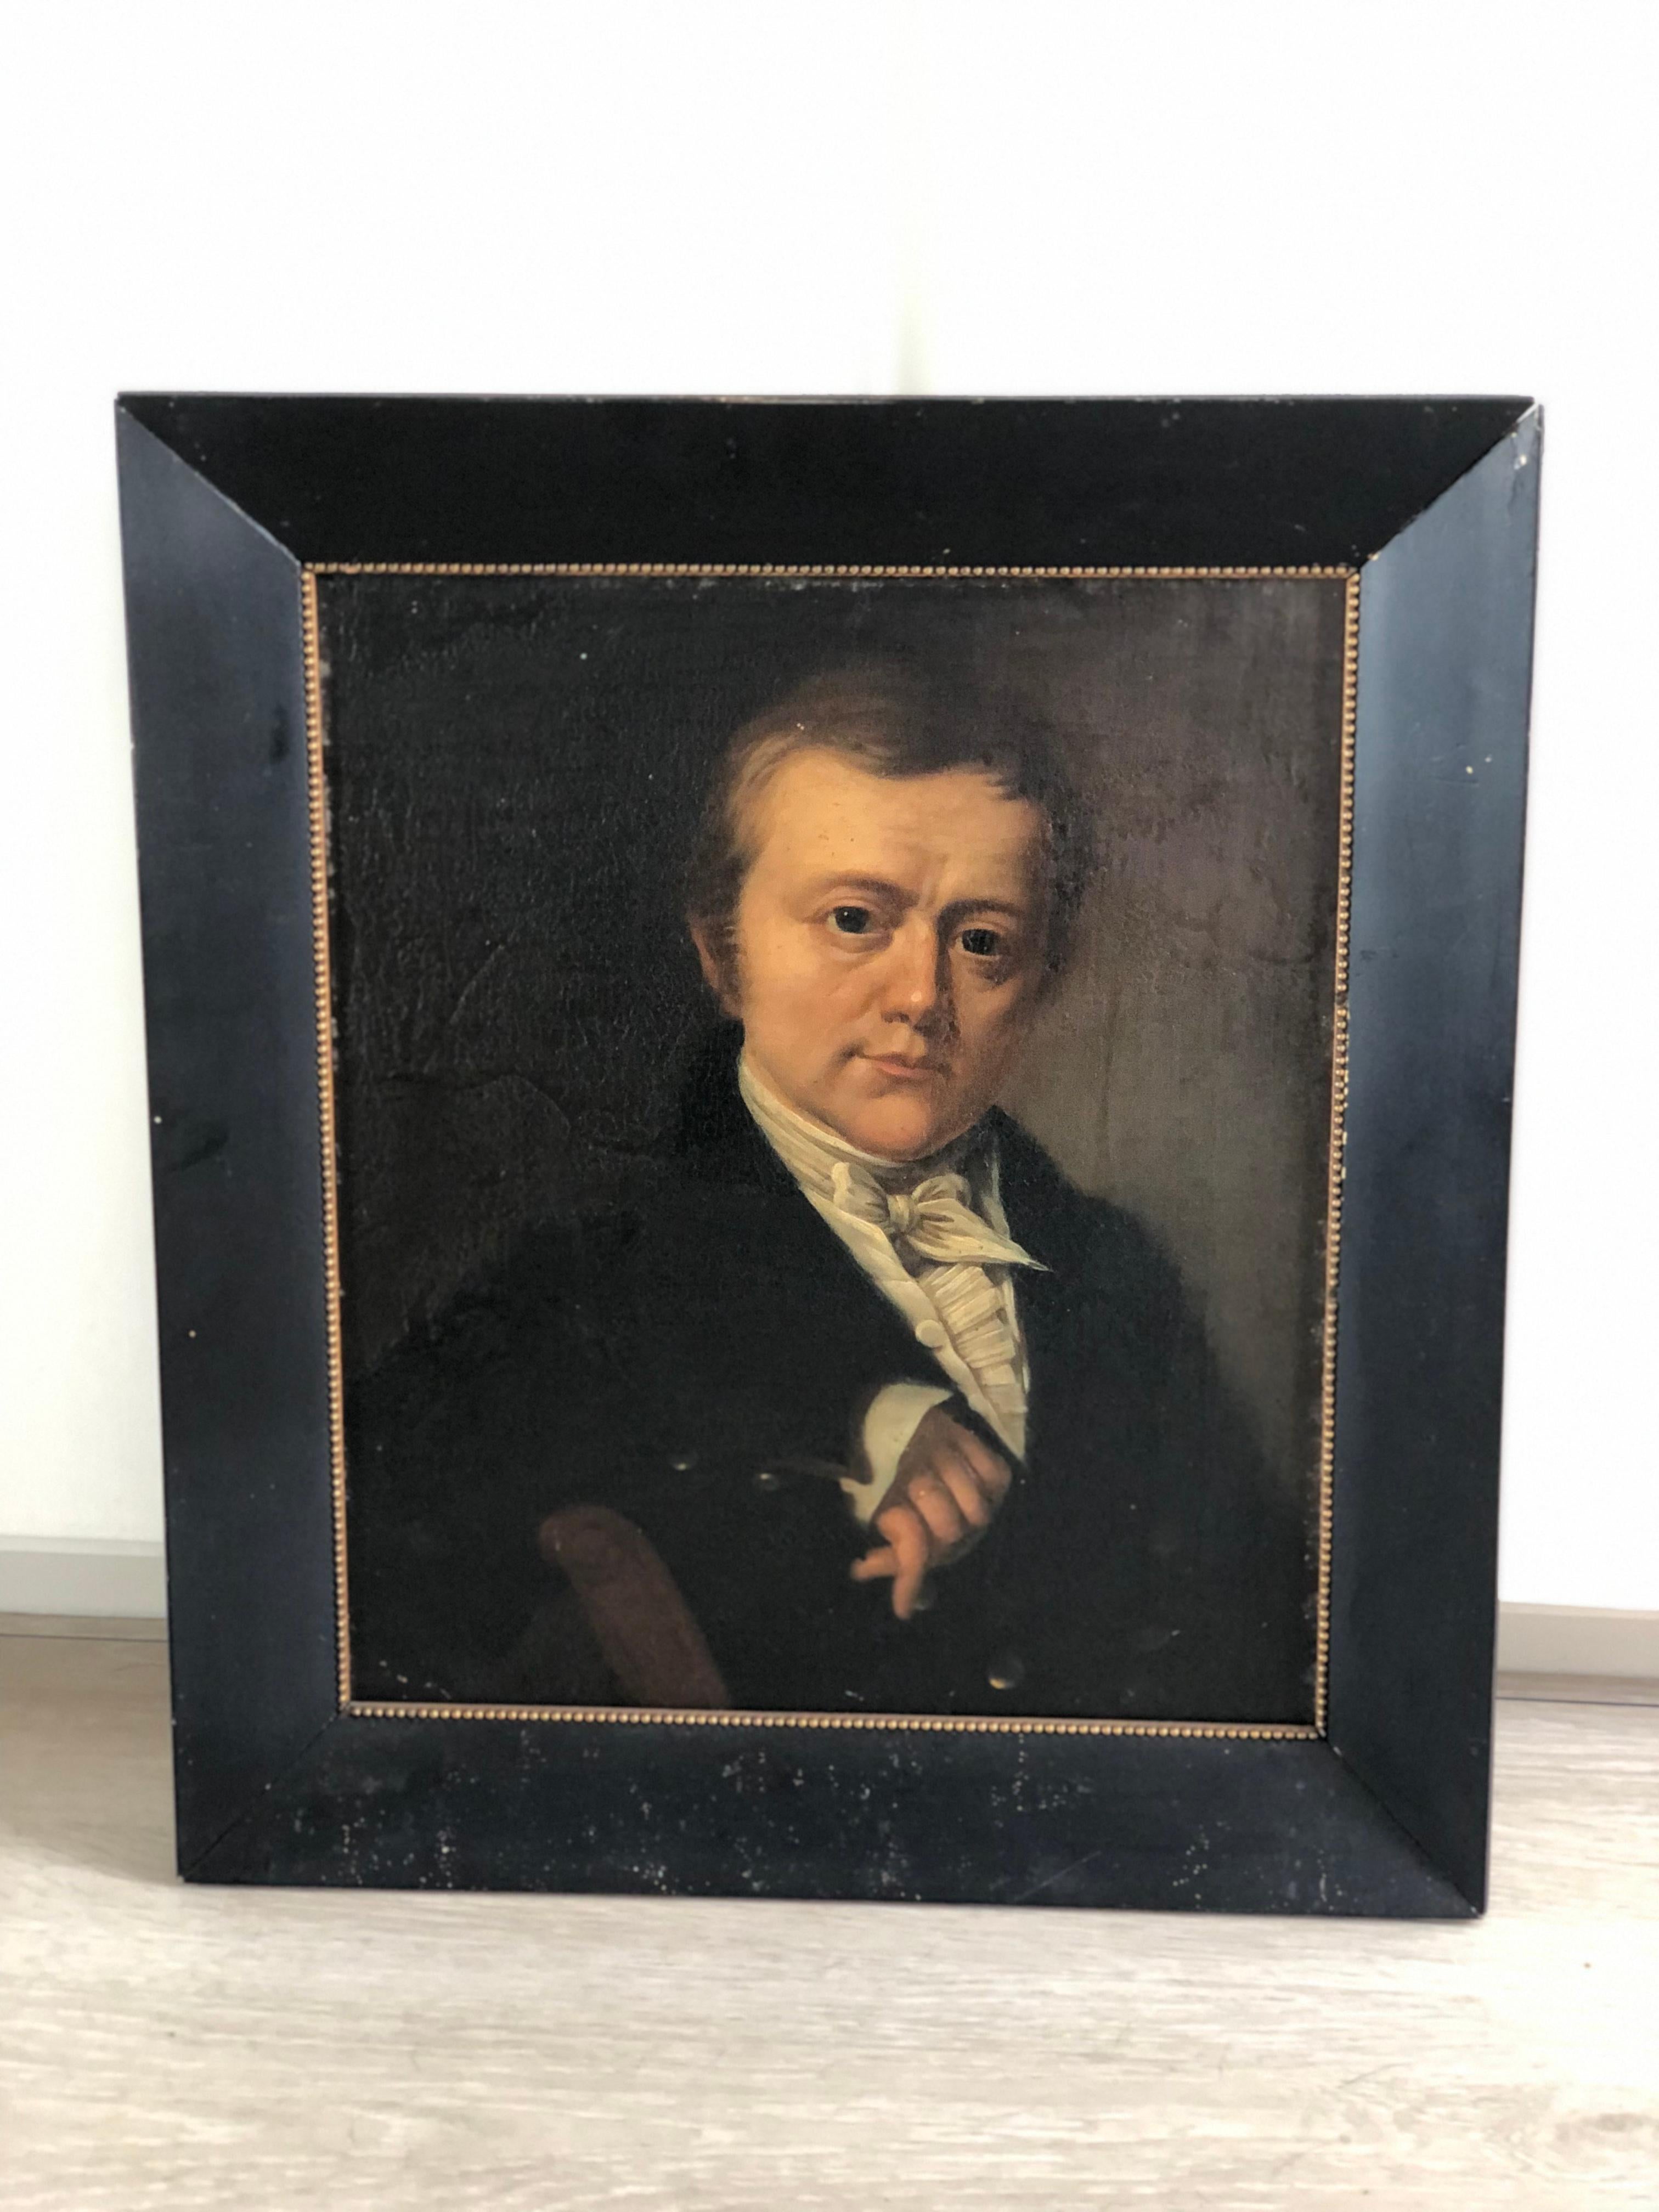 This dark captivating portrait painting from circa. 1840 captures the elegance and grandeur of the 19th century era in Holland perfectly. Painted by an artist of the Dutch School, this painting of a prominent gentleman offers a glimpse into the